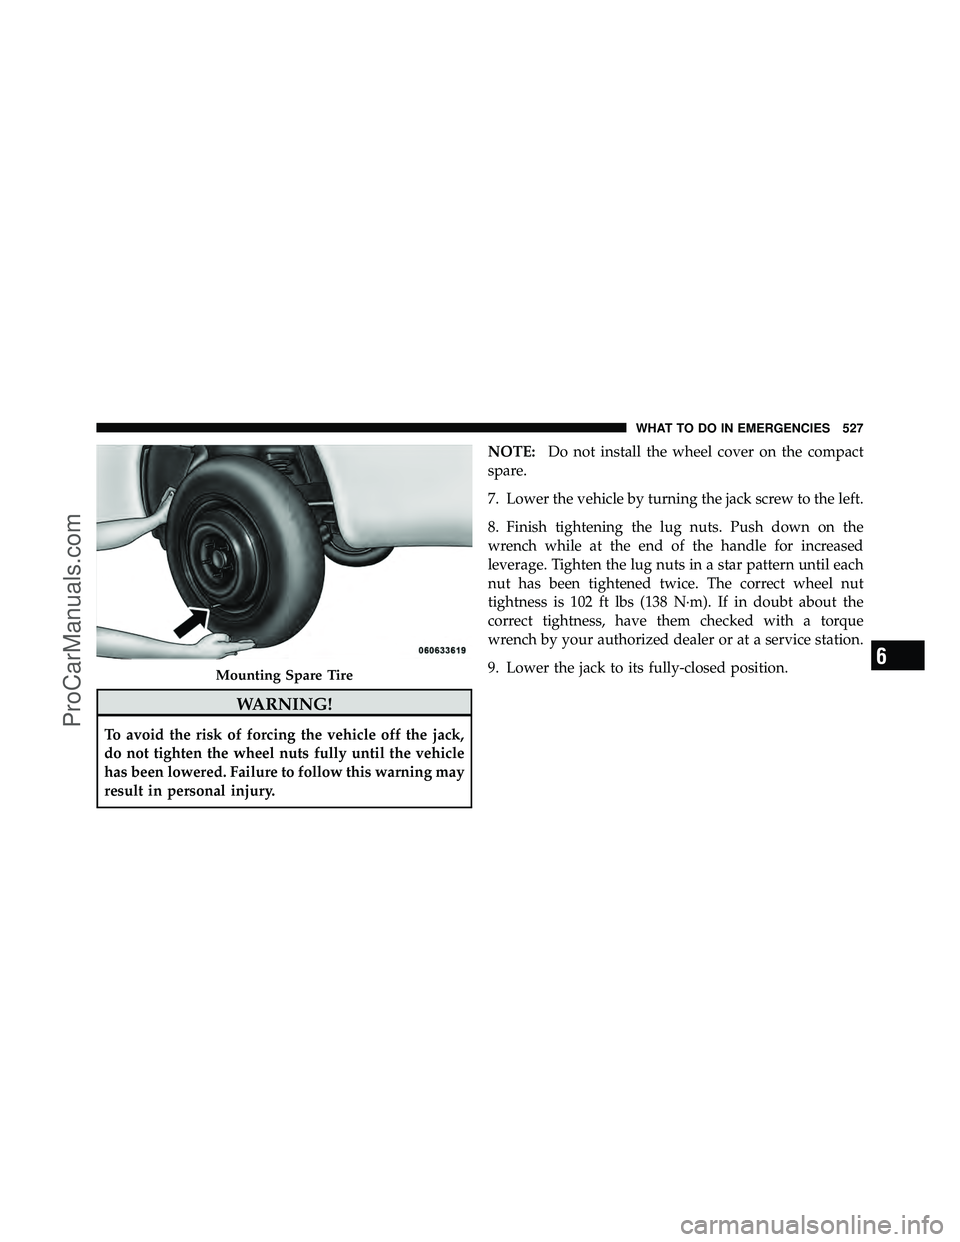 DODGE CARAVAN 2012  Owners Manual WARNING!
To avoid the risk of forcing the vehicle off the jack,
do not tighten the wheel nuts fully until the vehicle
has been lowered. Failure to follow this warning may
result in personal injury.NOT